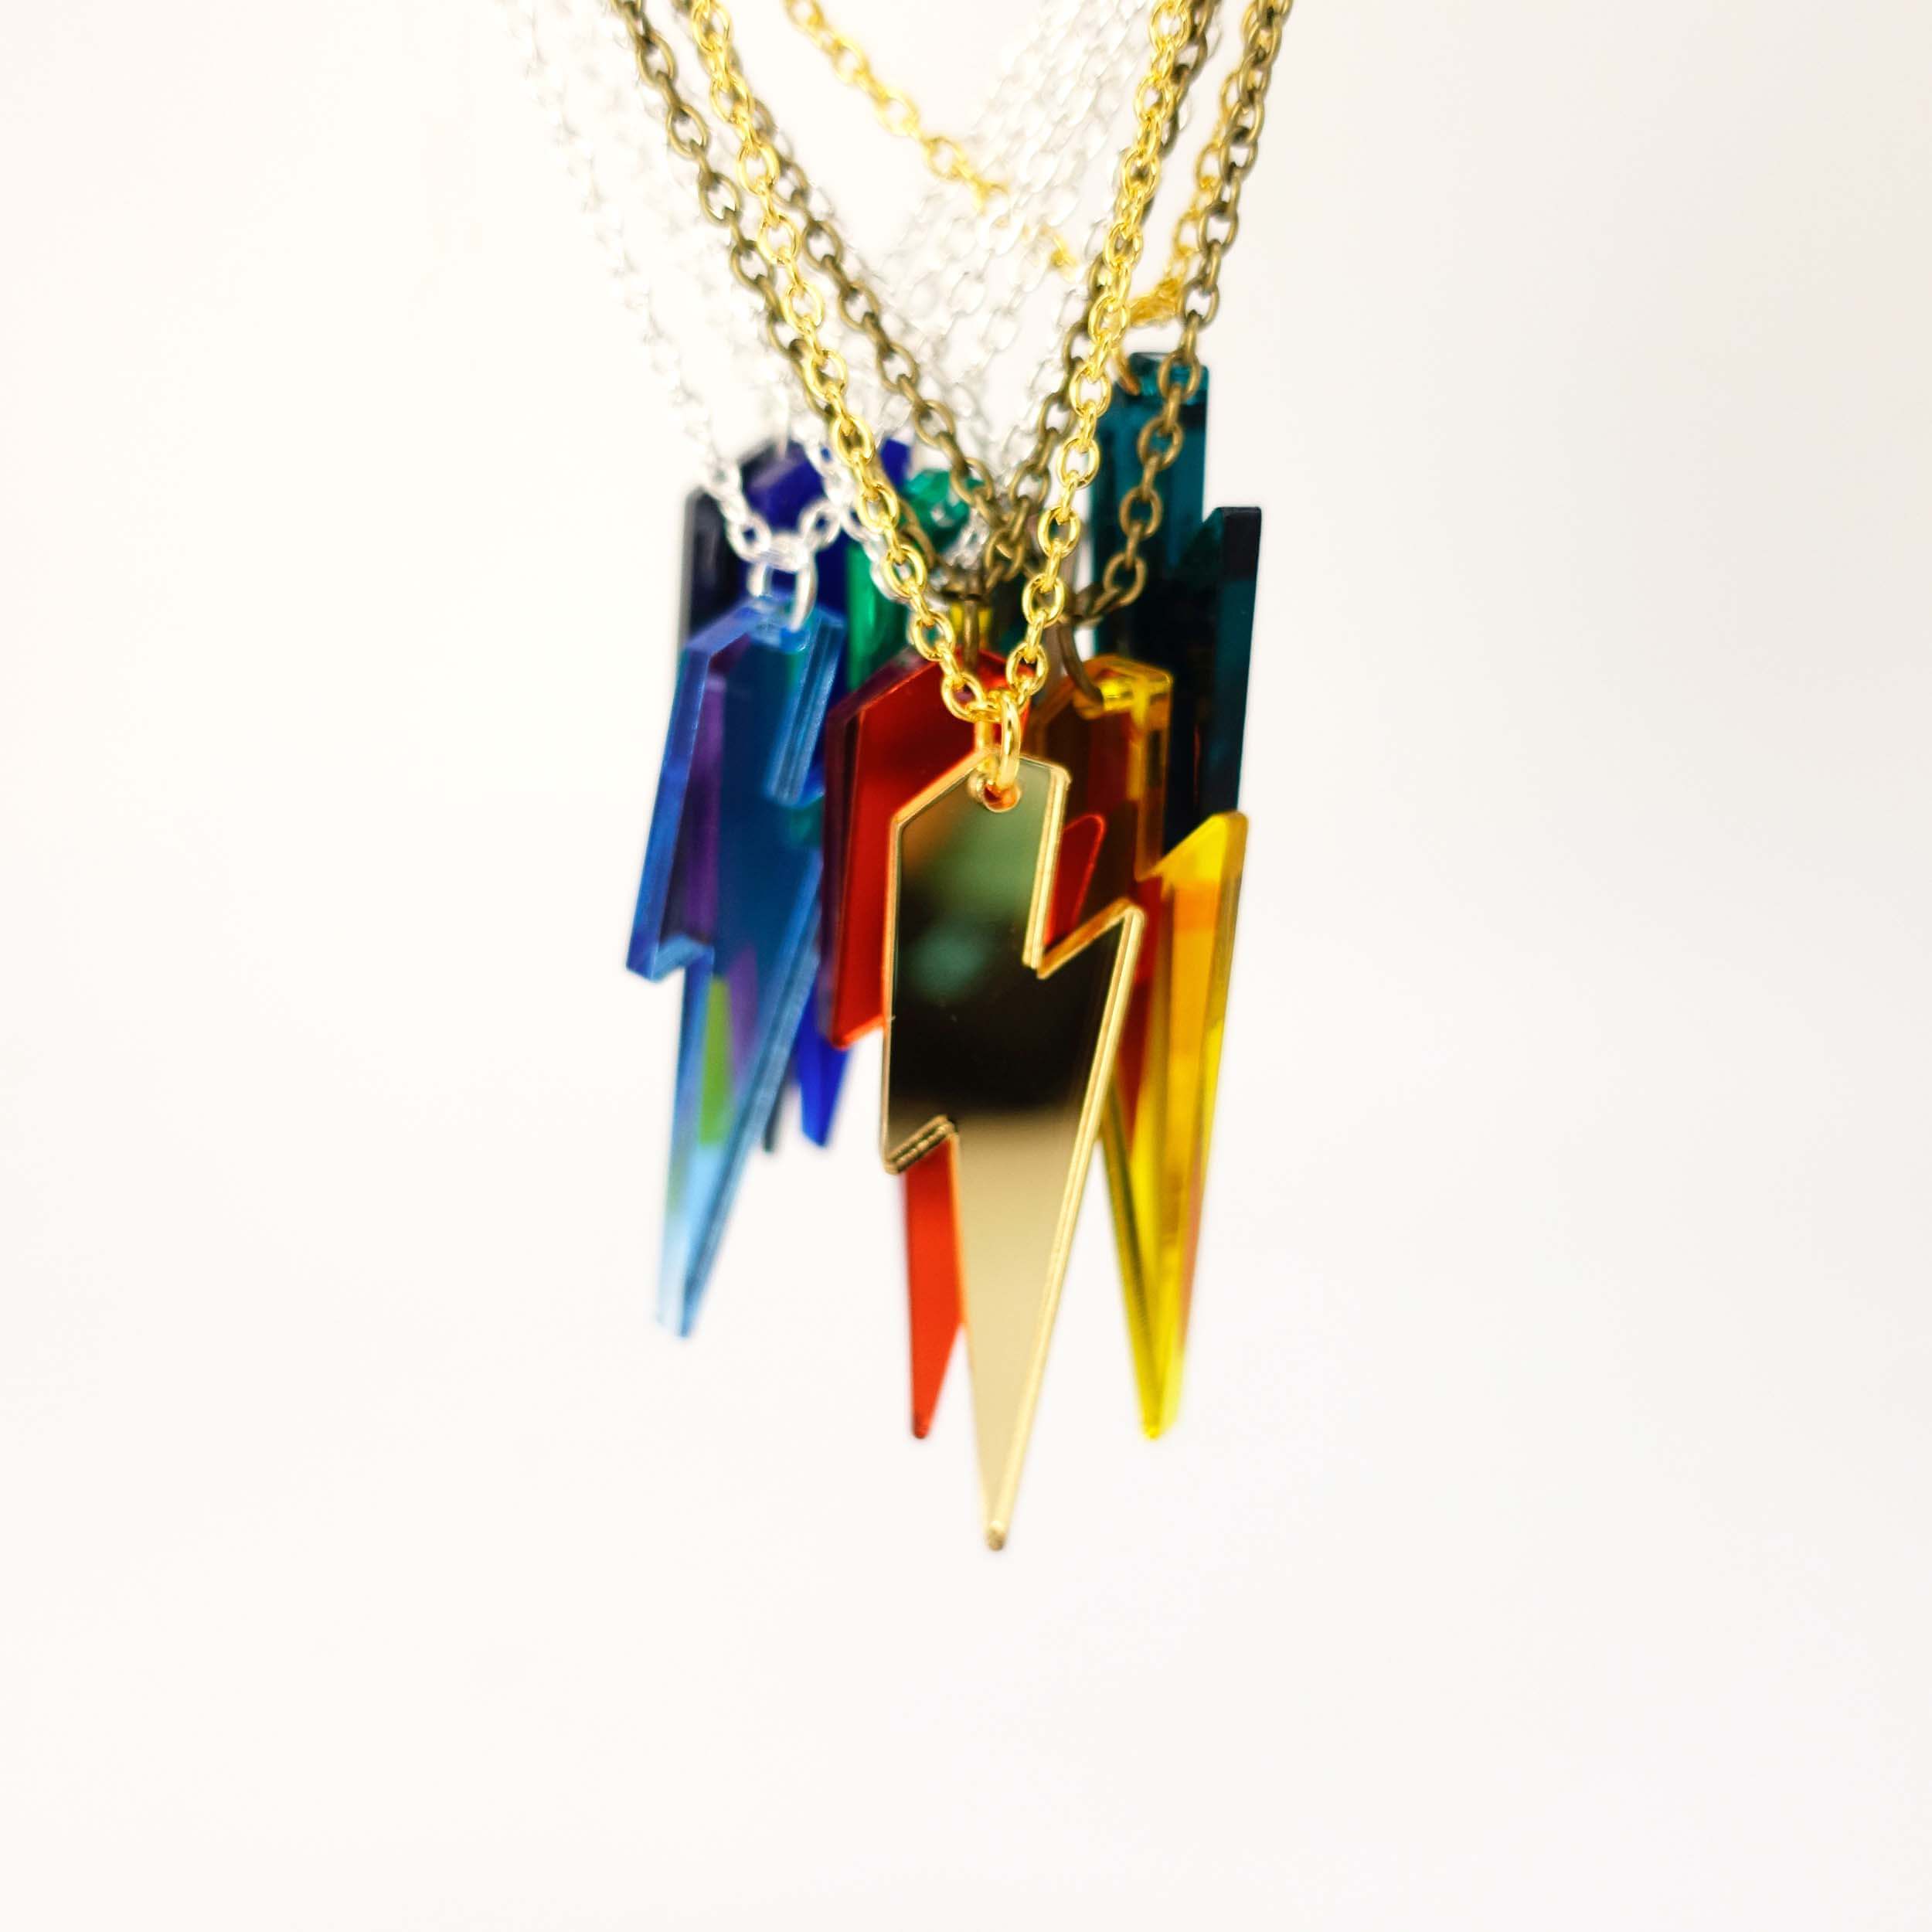 A group of Lightning Bolt necklaces in all the different mirror colours shown hanging against a white background. 